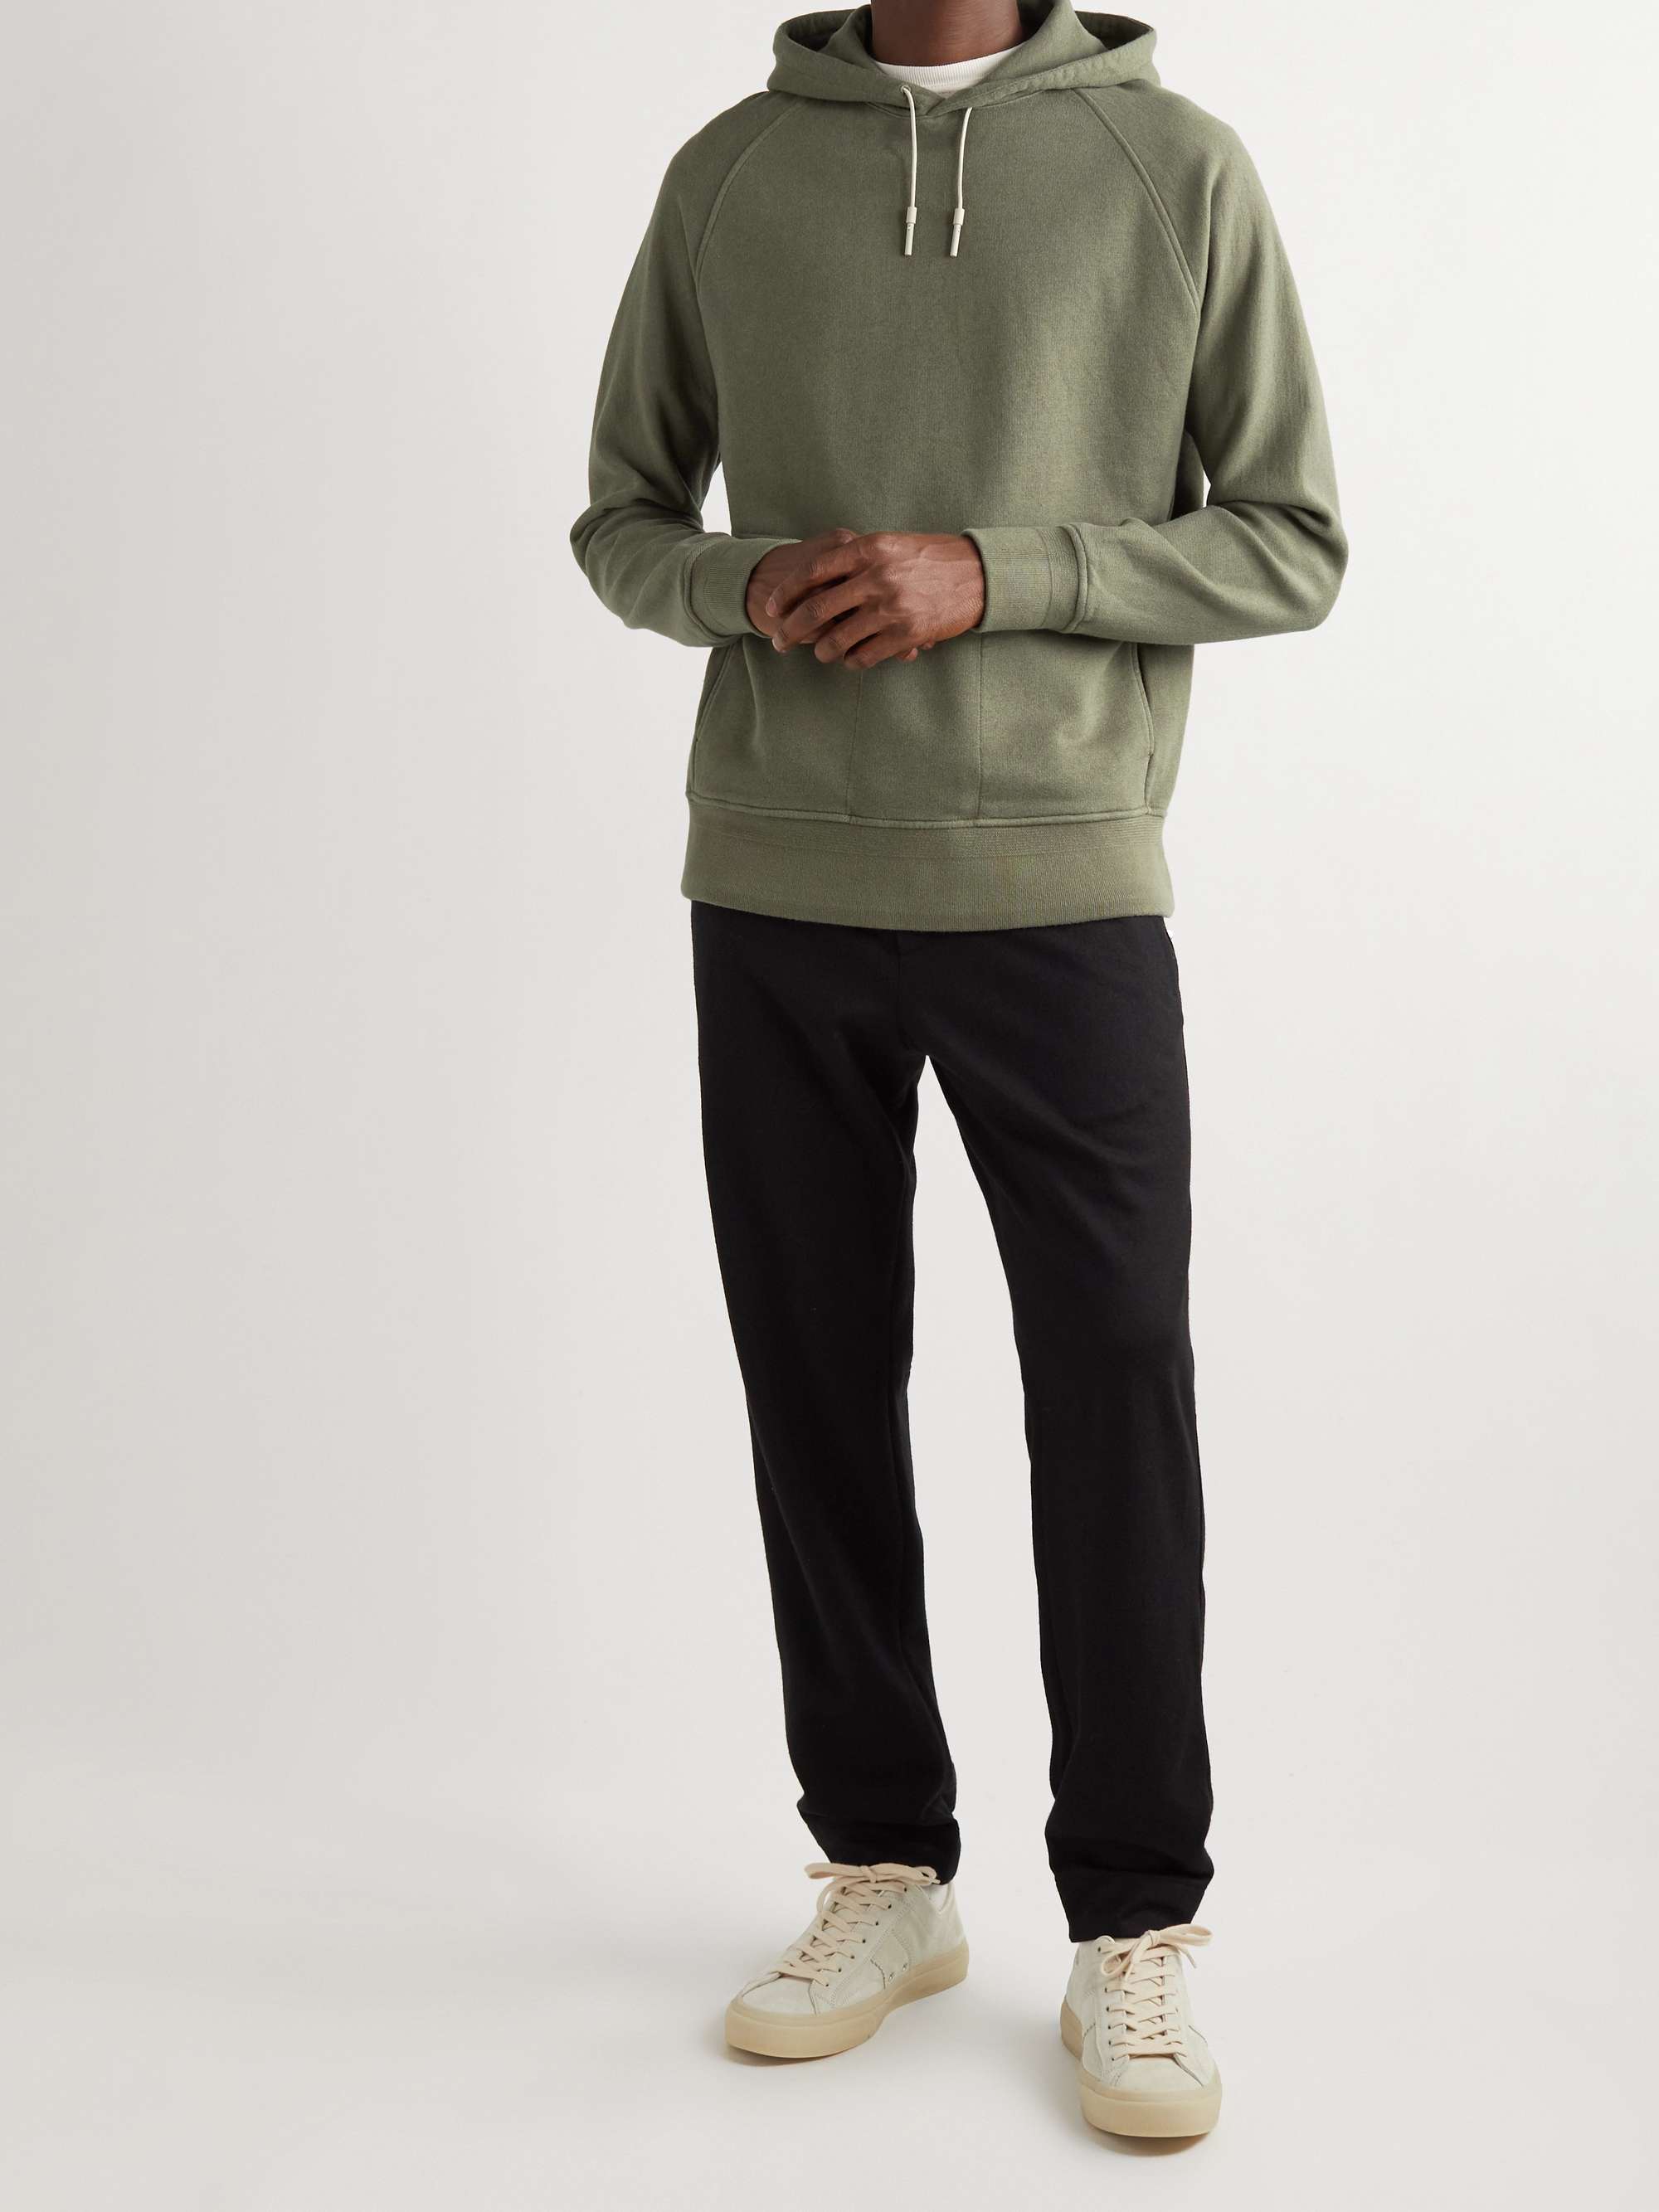 ZEGNA Garment-Dyed Cotton and Cashmere-Blend Jersey Hoodie